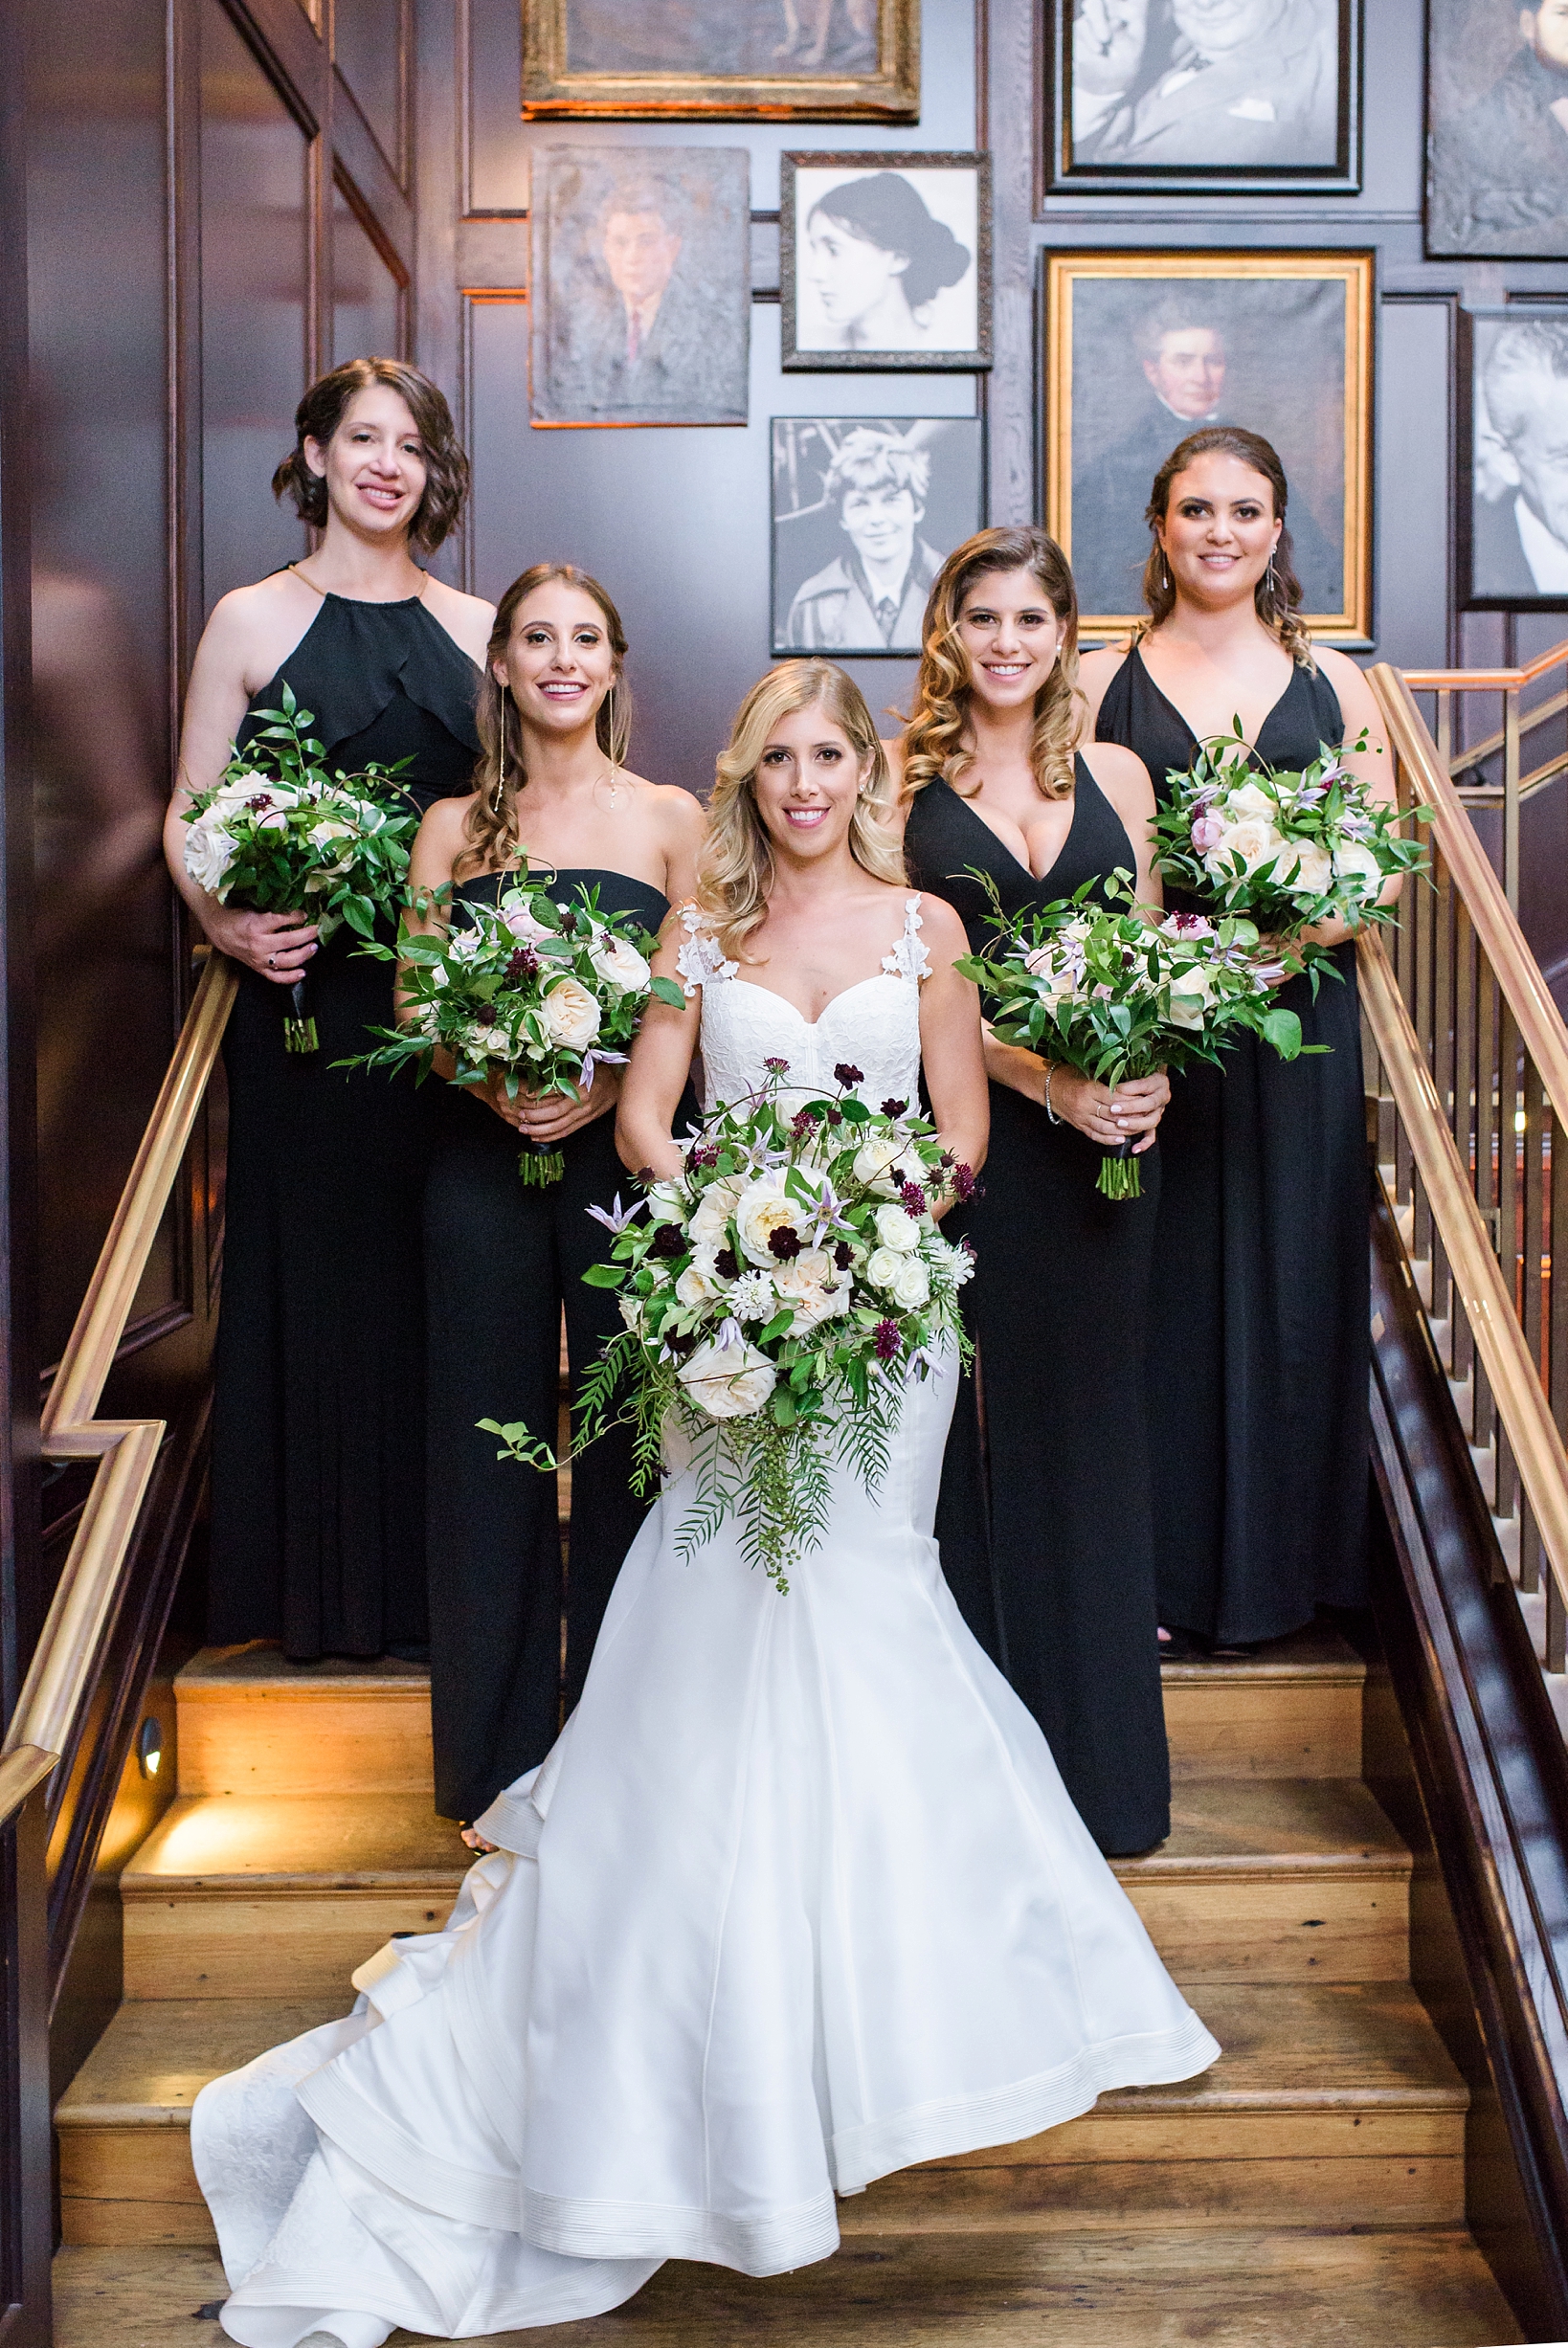 Bride and her Bridesmaids on the steps of the Oxford Exchange in Tampa, FL before the wedding ceremony